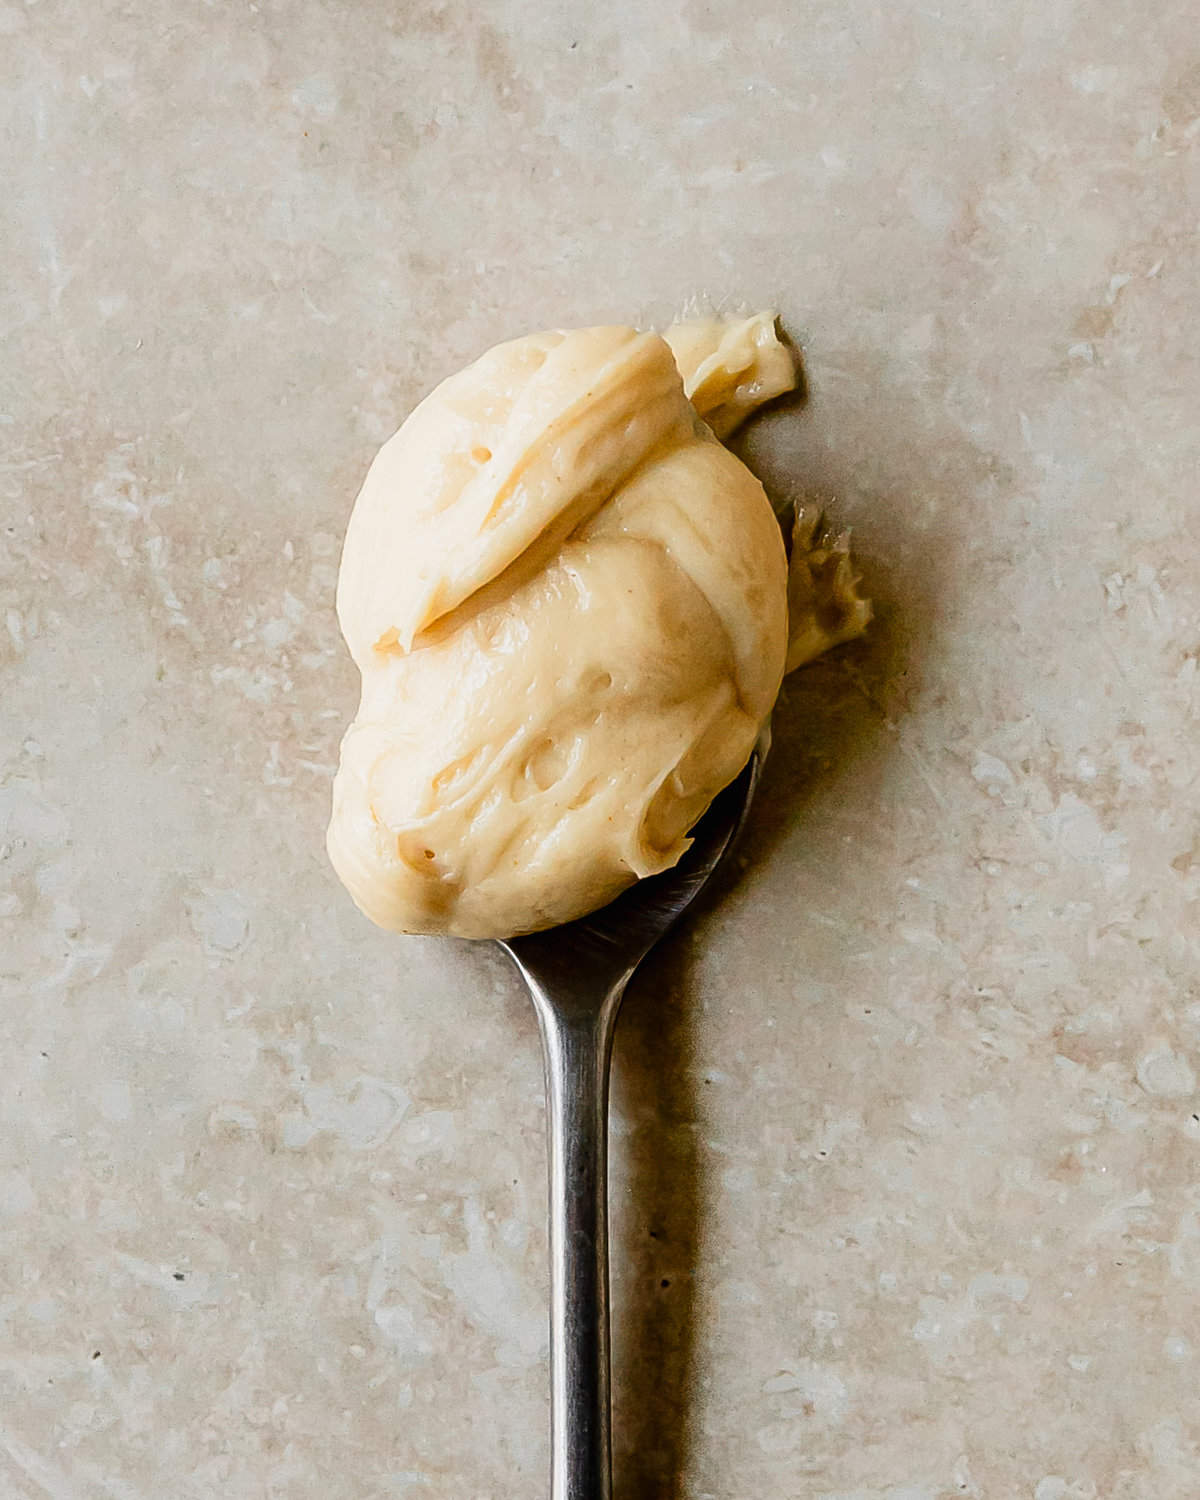 Peanut butter frosting is a rich, creamy, nutty and slightly tangy peanut butter icing. This peanut butter frosting with cream cheese is easy to make, using just a handful of ingredients. This recipe makes the perfect peanut butter frosting for cookies, cakes, cupcakes or to enjoy by the spoonful. 